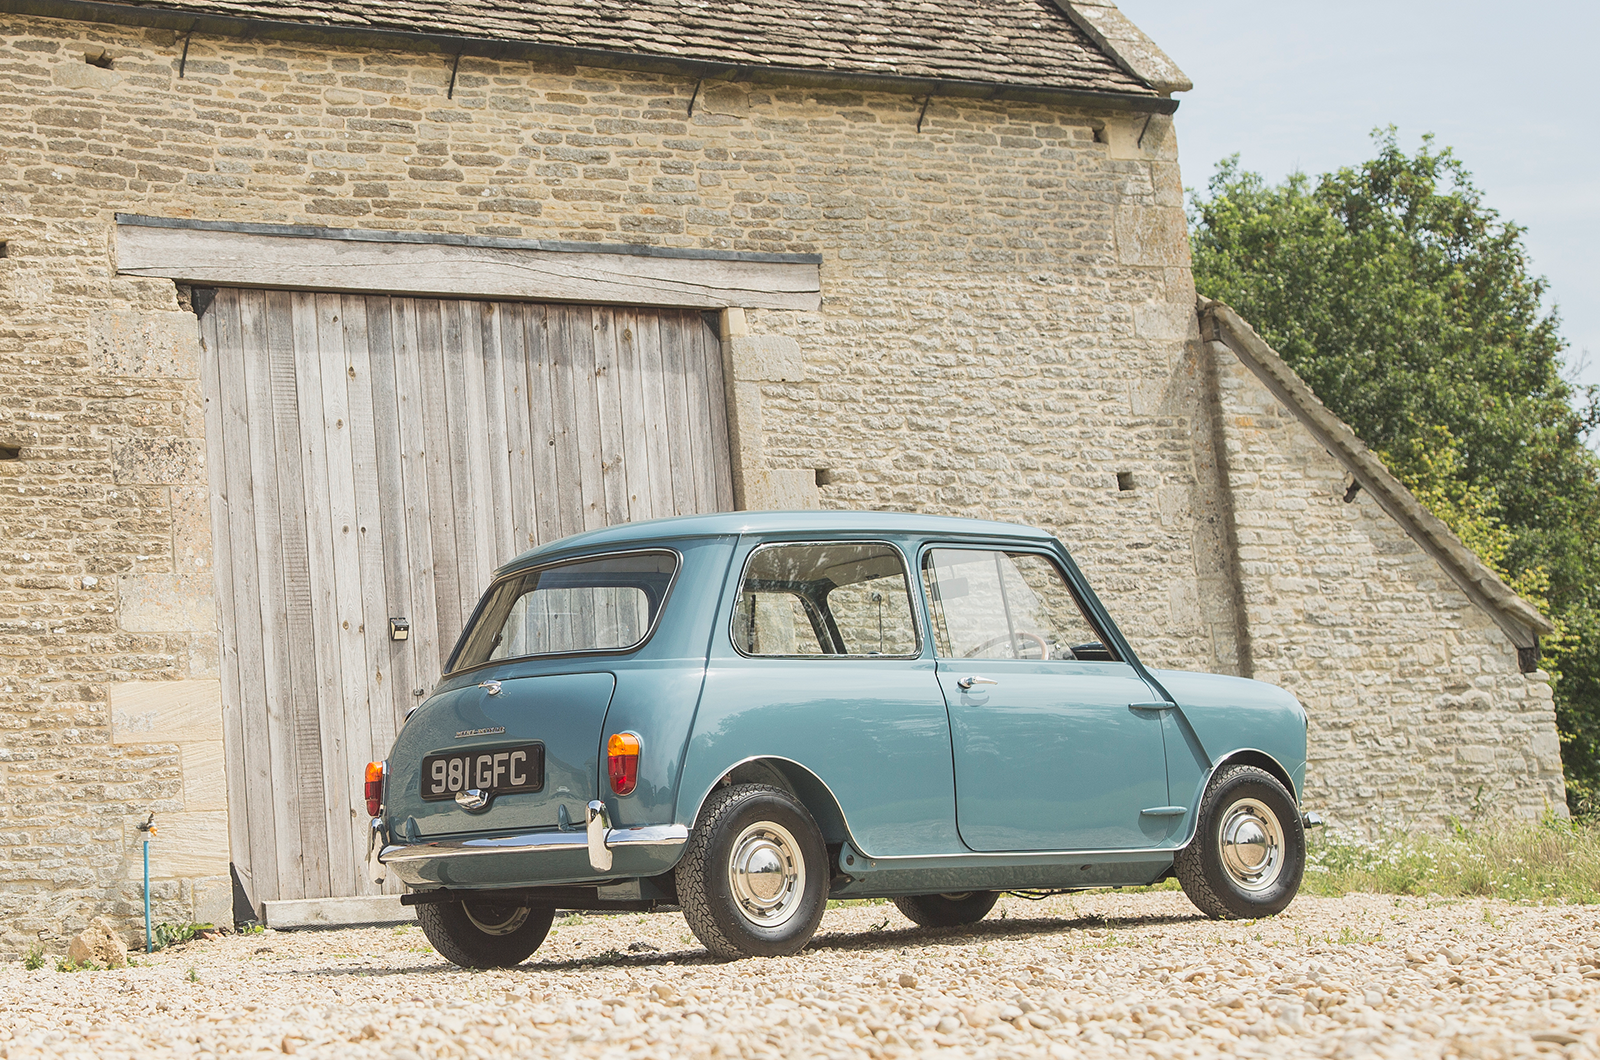 The story of a very special classic Mini